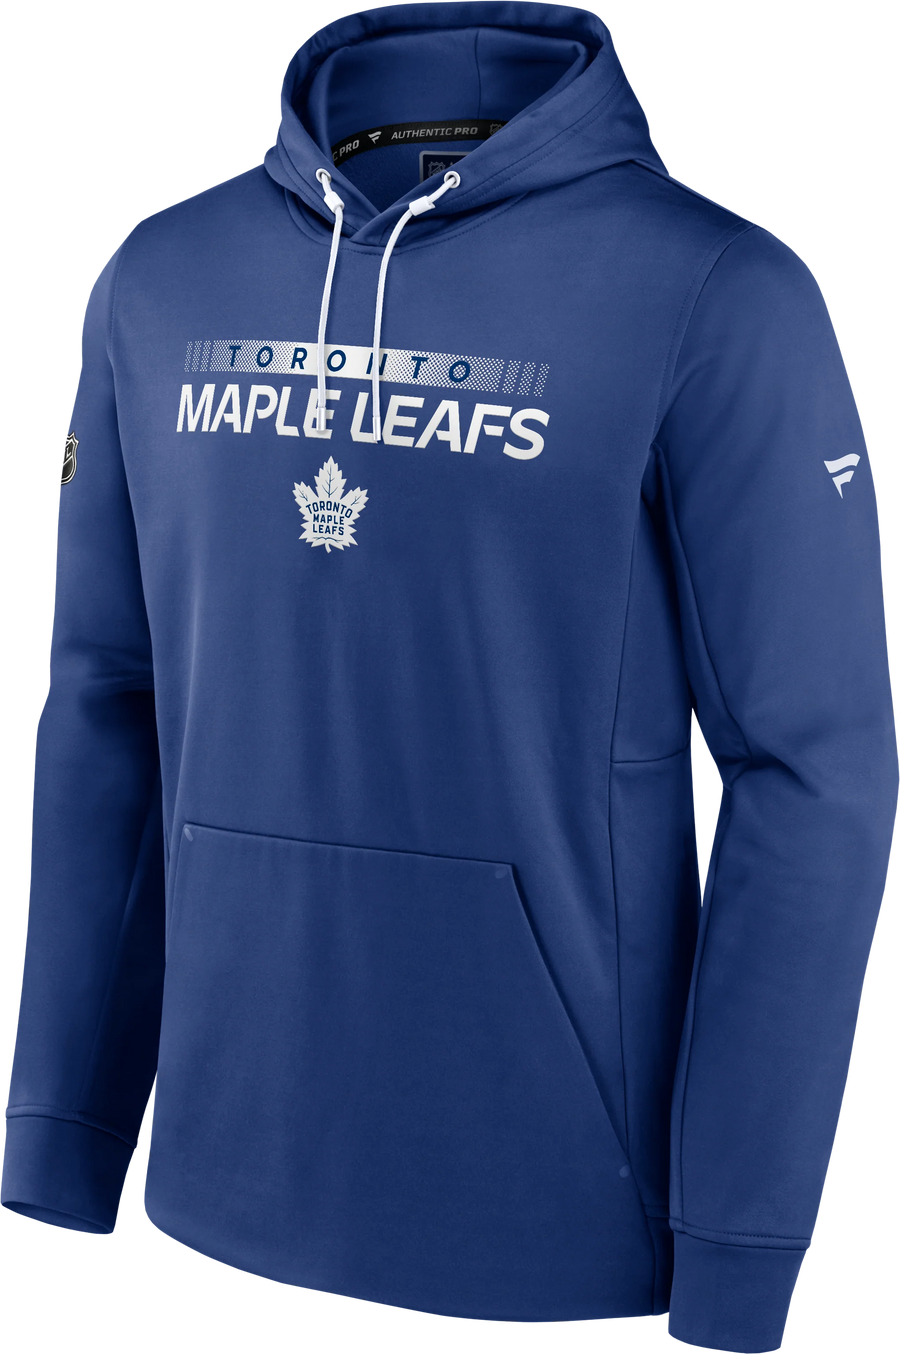 New NHL AUSTON MATTHEWS Lacer Old Time Hooded Hockey Jersey 34 Maple Leafs  Large